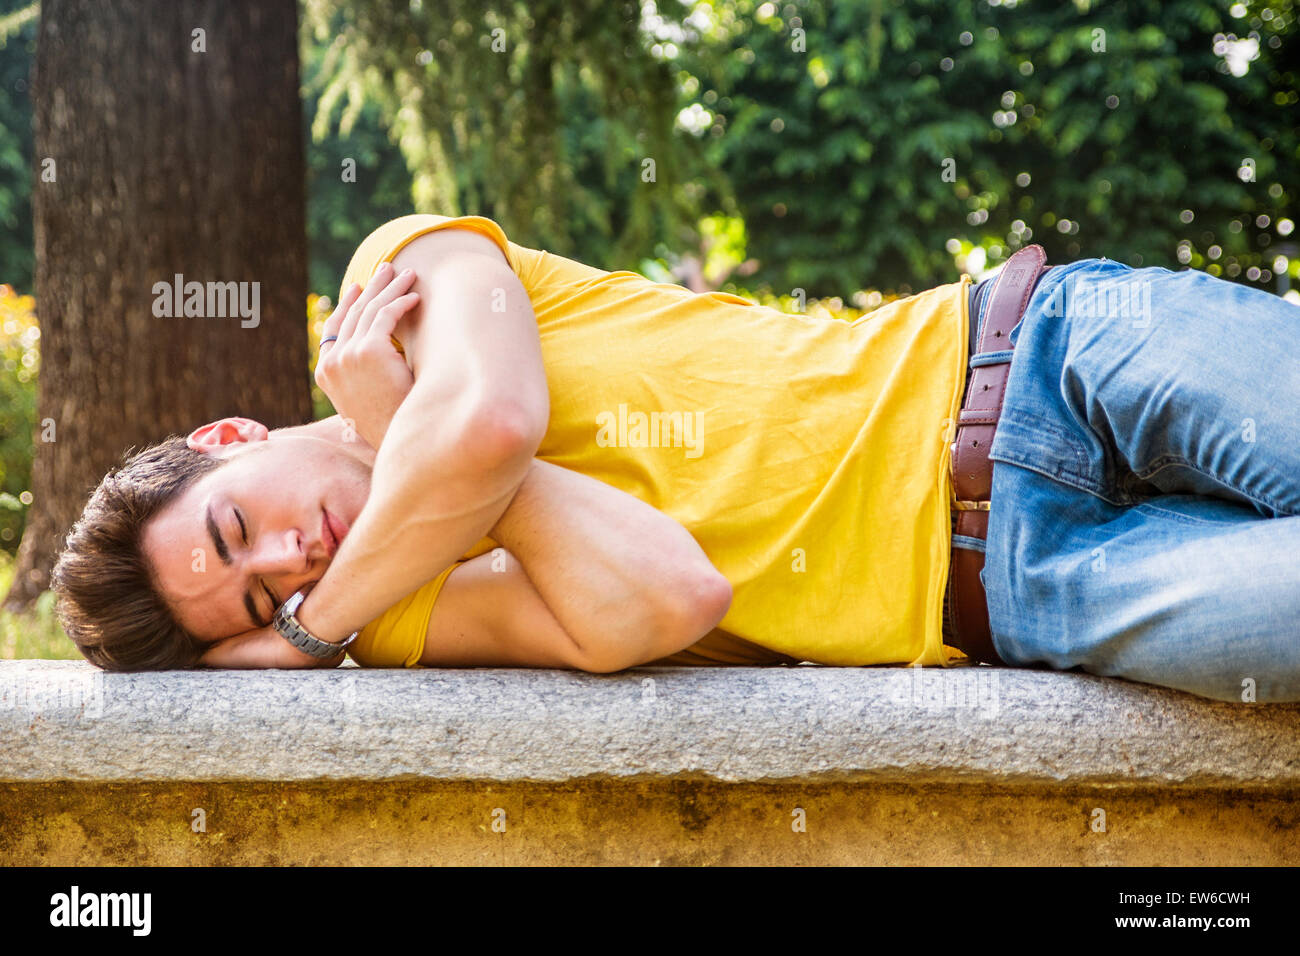 Attractive young man sleeping on stone bench outdoor in city park during day Stock Photo